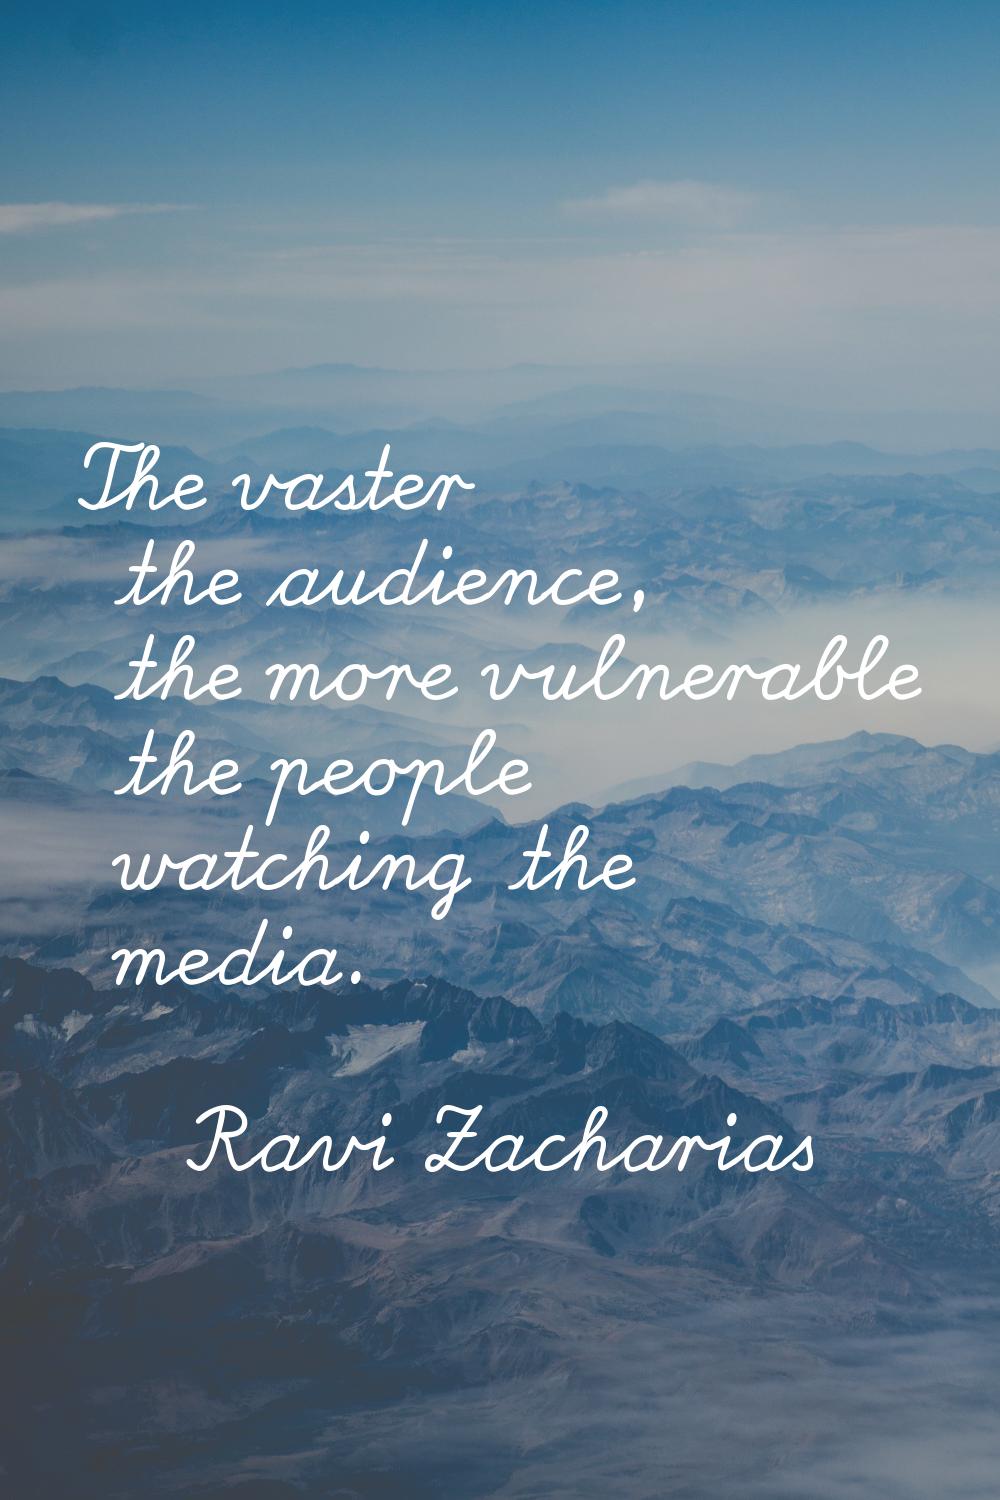 The vaster the audience, the more vulnerable the people watching the media.